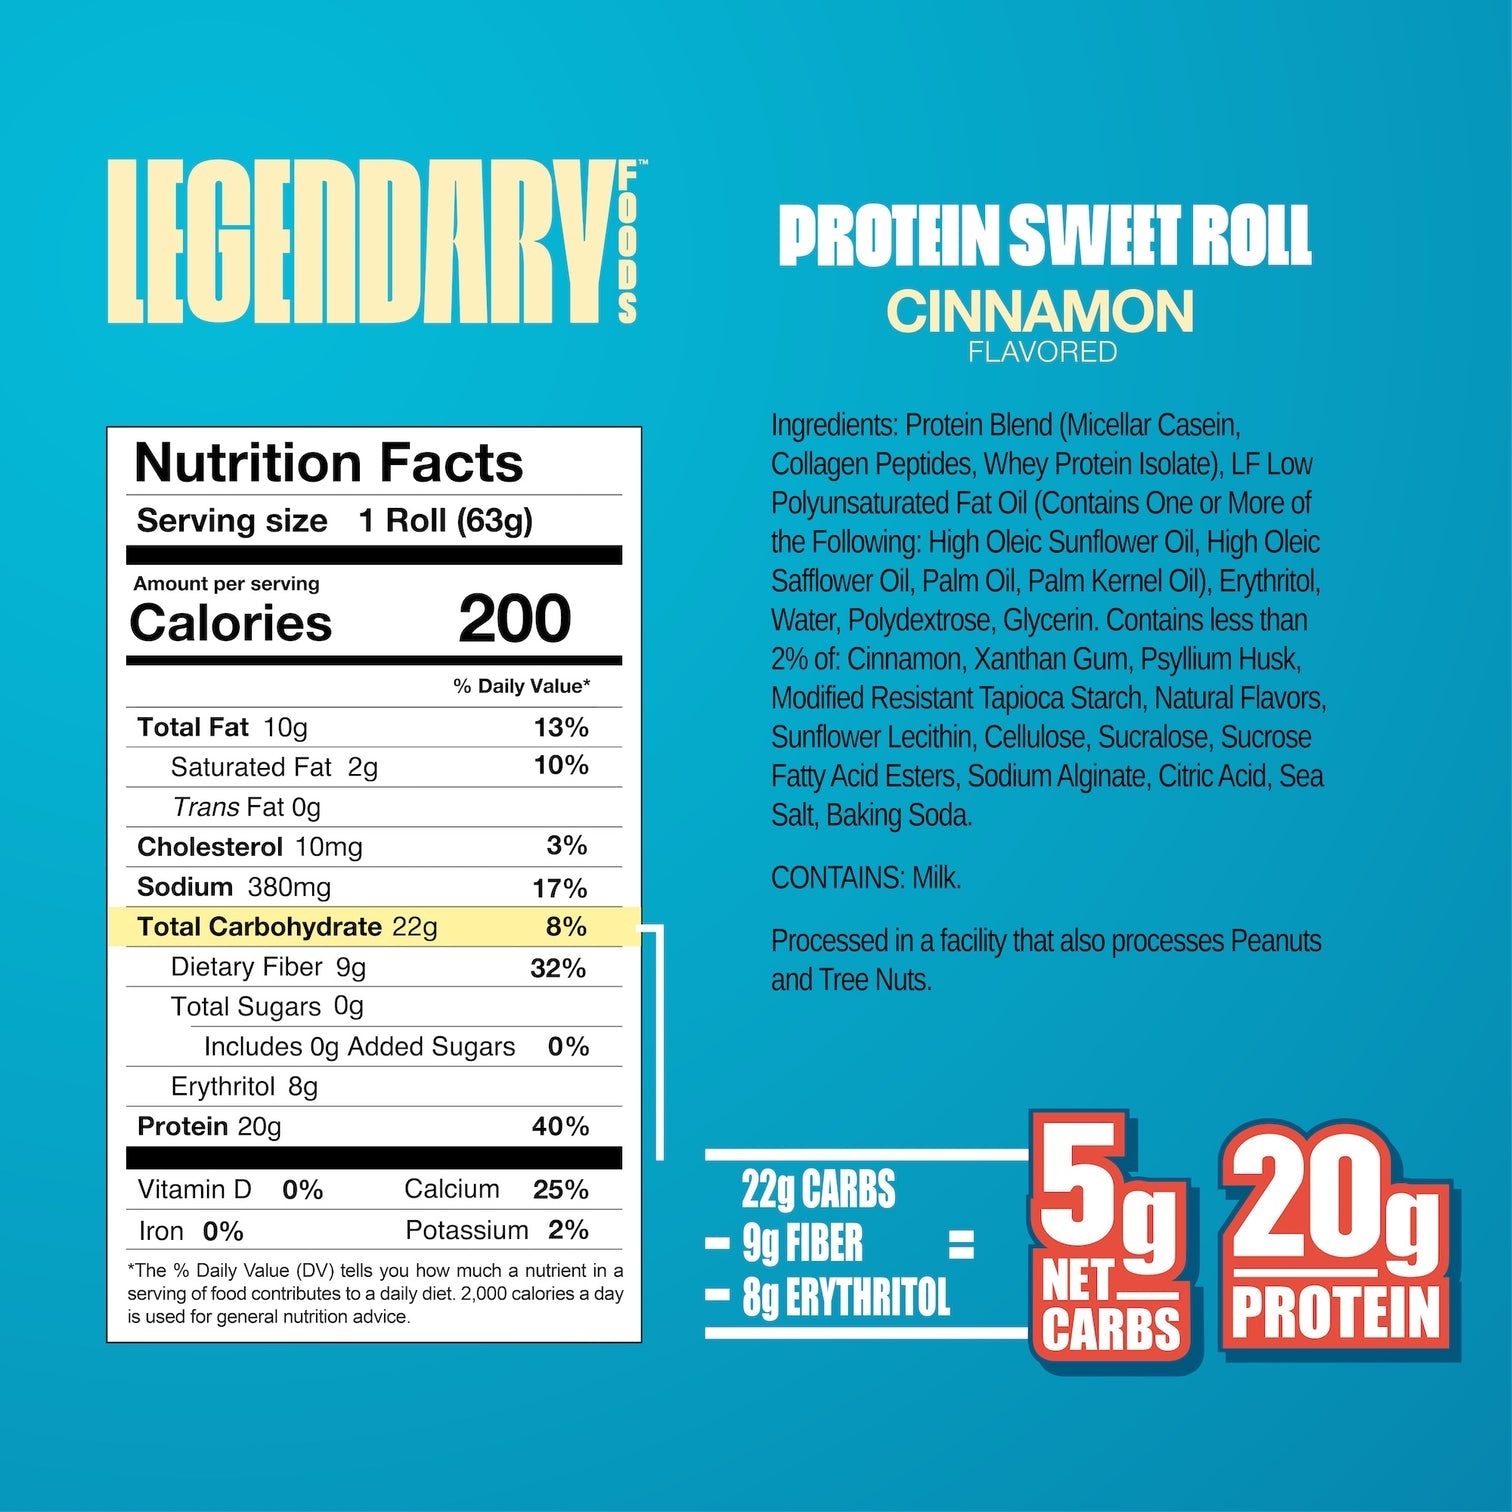 Protein Sweet Roll by Legendary Foods - Cinnamon - High-quality Cakes & Cookies by Legendary Foods at 